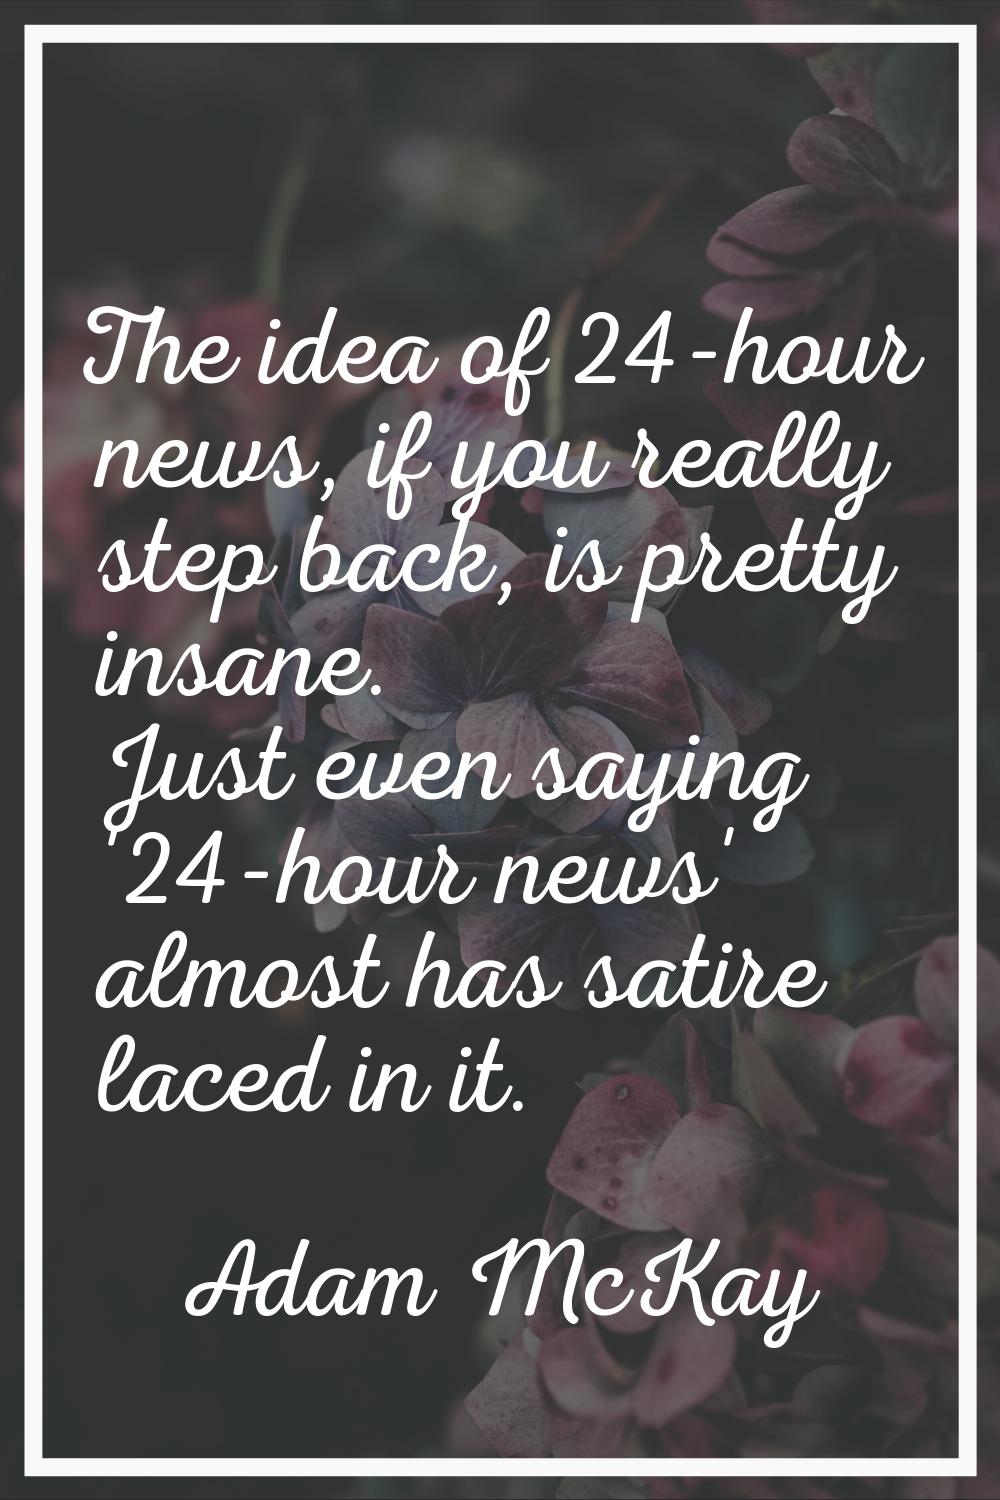 The idea of 24-hour news, if you really step back, is pretty insane. Just even saying '24-hour news